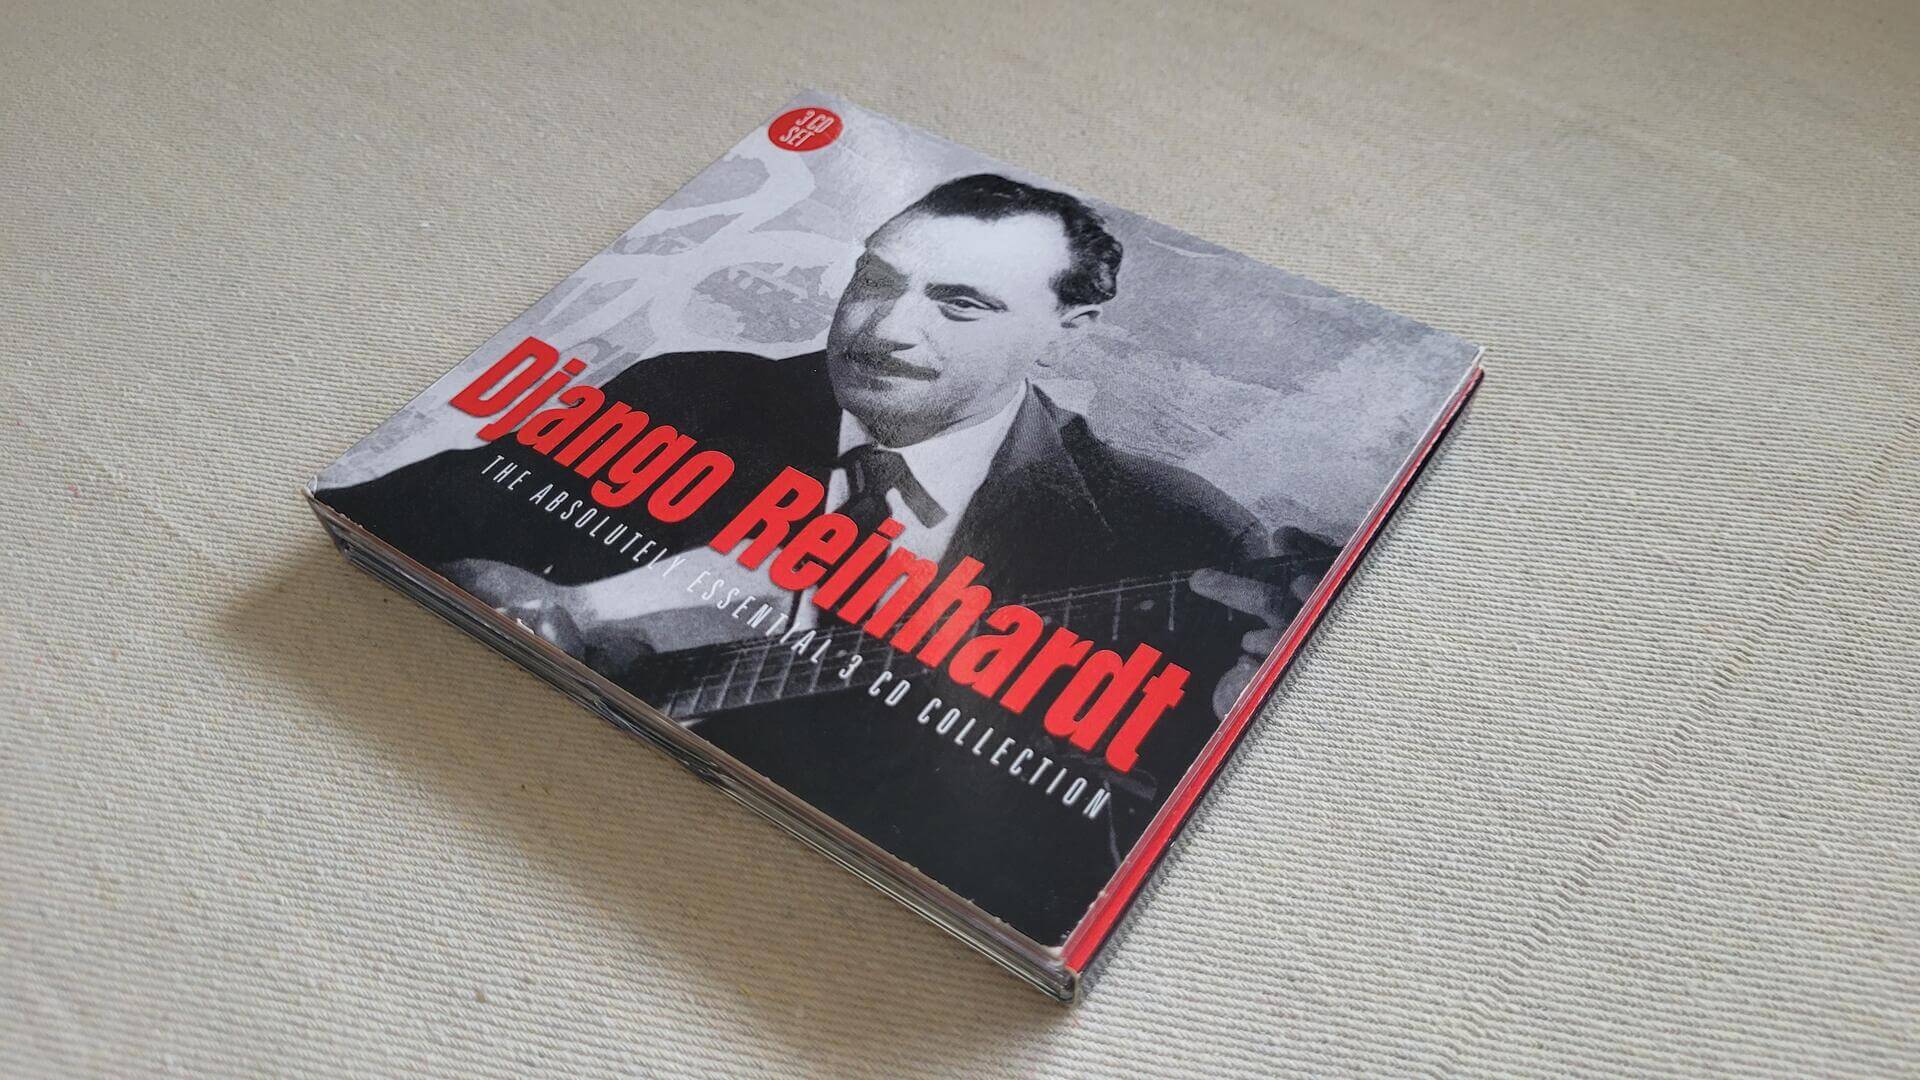 Django Reinhardt The Absolutely Essential 3 CD Collection by Universal Music Canada released in 2010